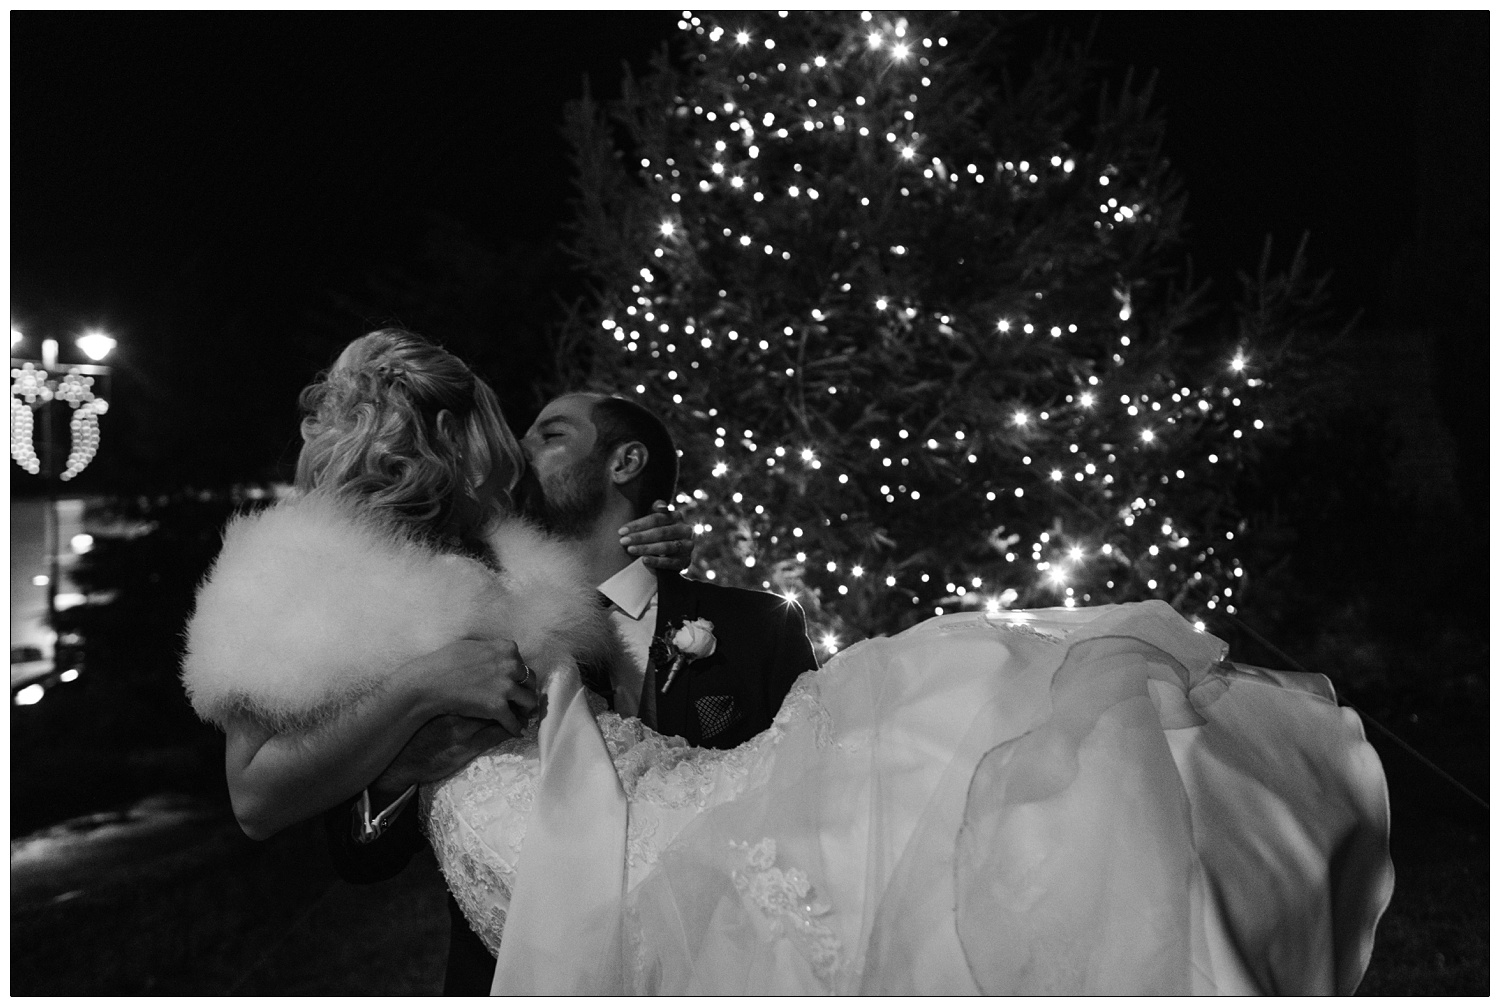 Man picks up woman in a wedding dress and kisses her outside and Christmas tree.